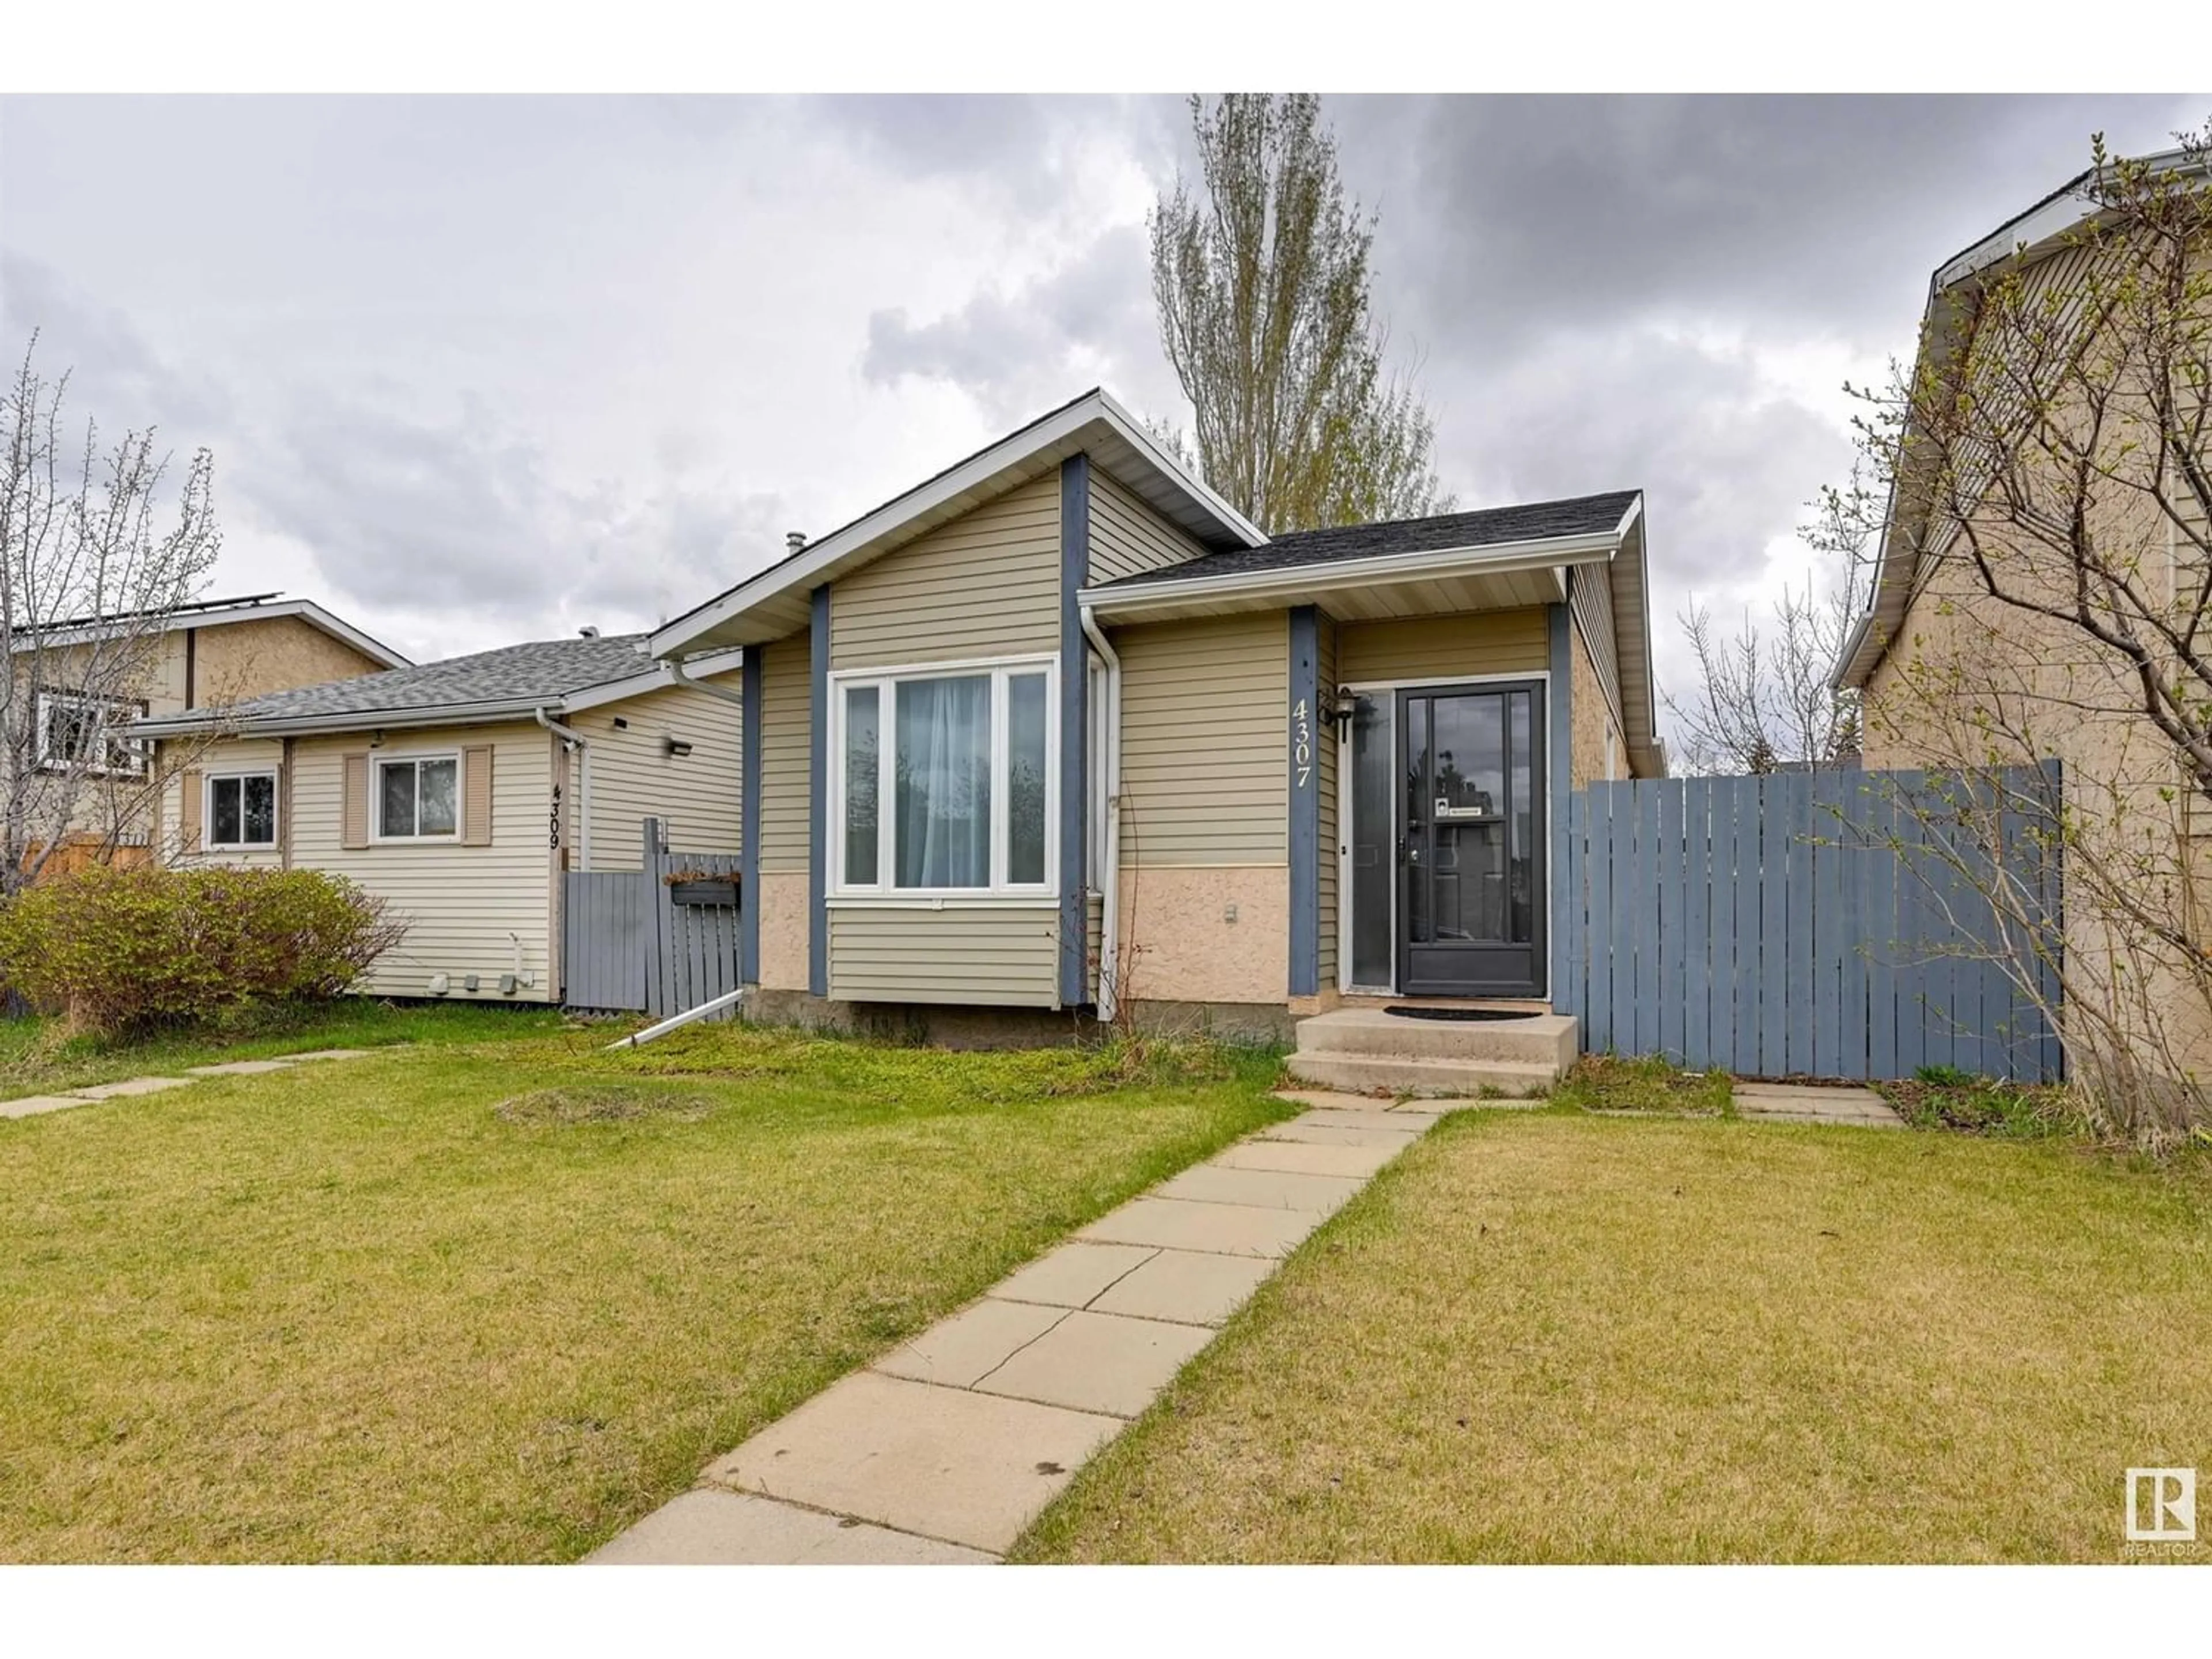 Frontside or backside of a home for 4307 38 ST NW NW, Edmonton Alberta T6L5A6